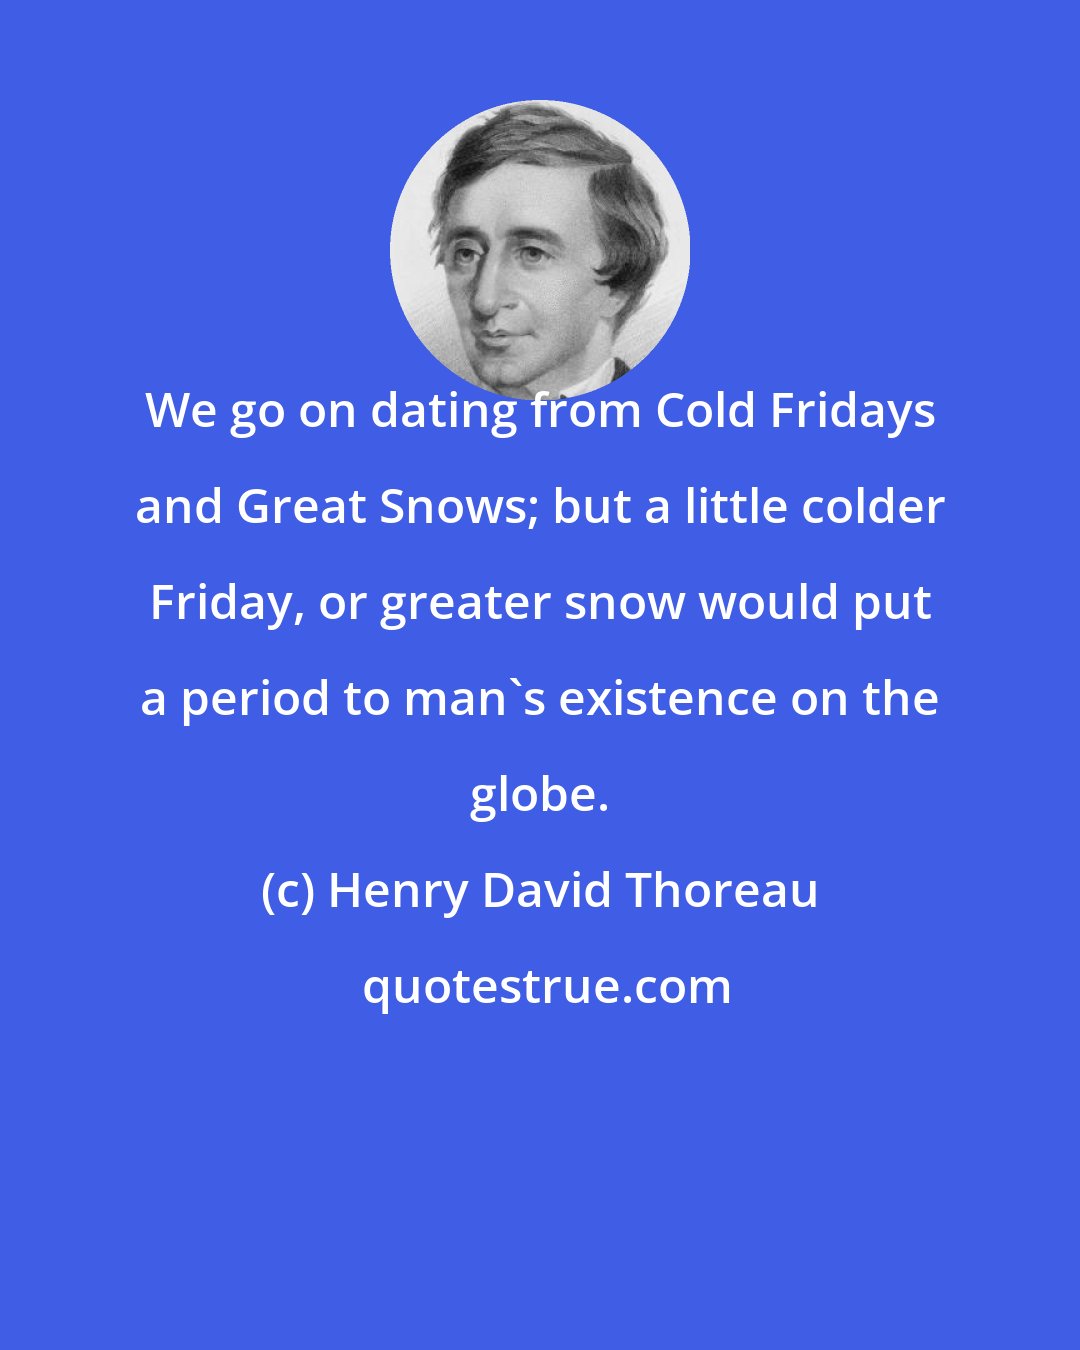 Henry David Thoreau: We go on dating from Cold Fridays and Great Snows; but a little colder Friday, or greater snow would put a period to man's existence on the globe.